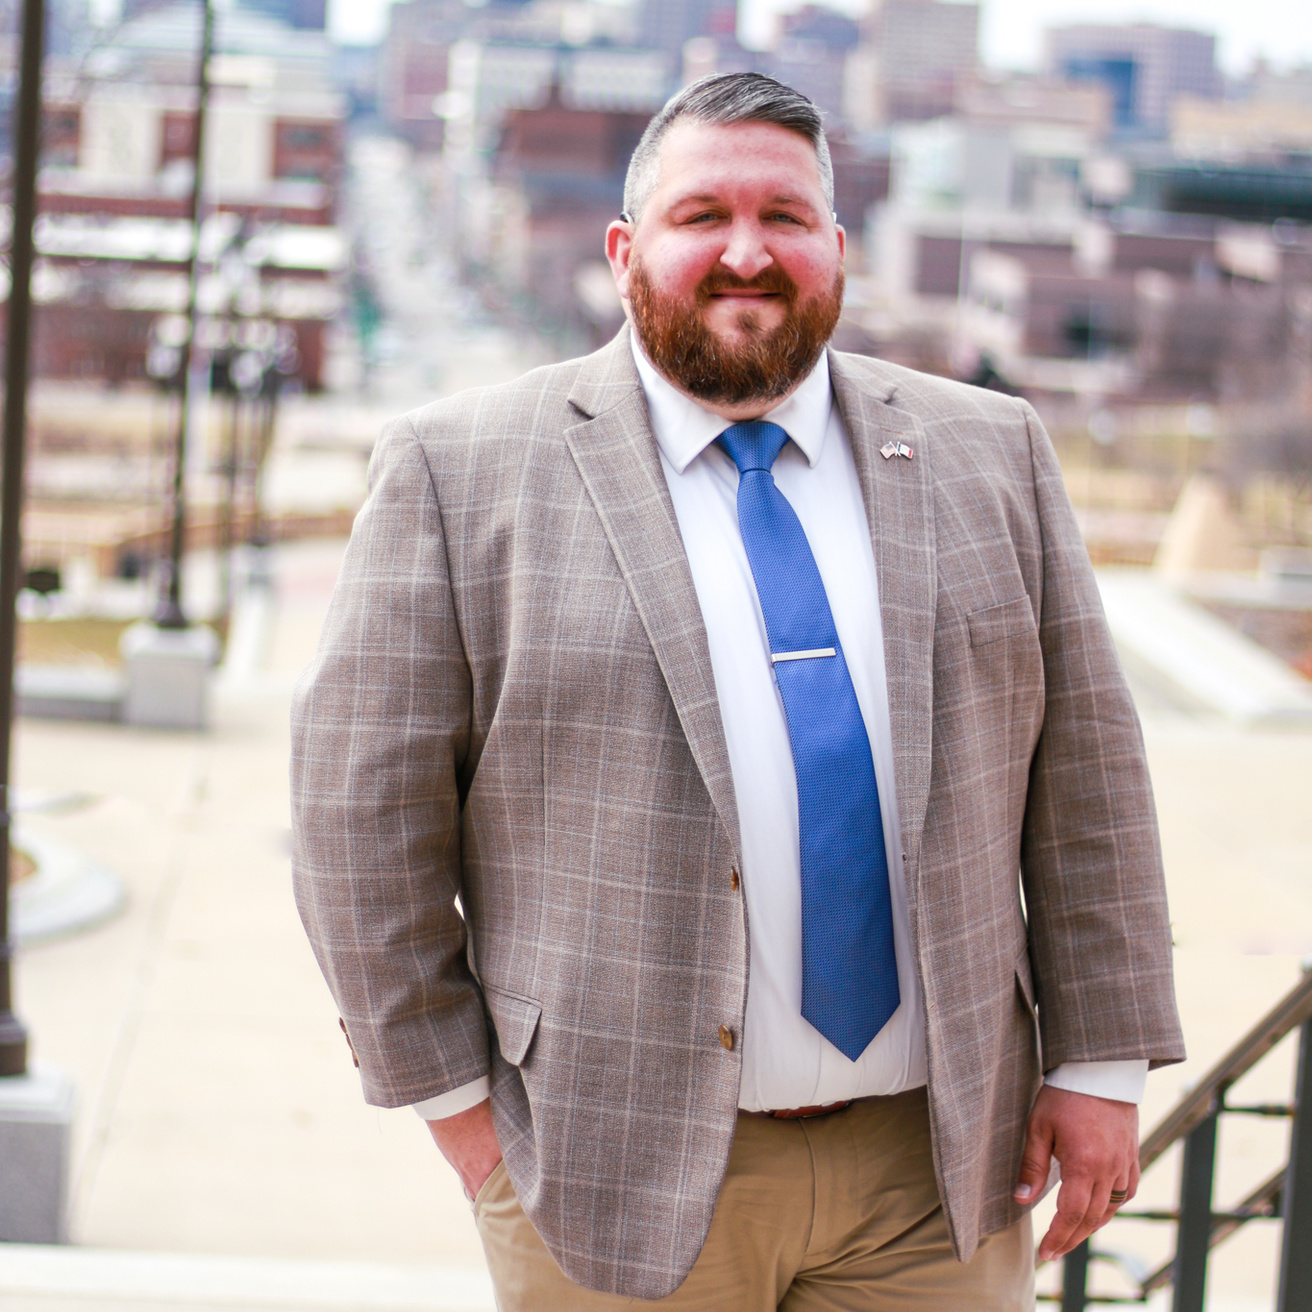 White man in a tweed blazer and blue tie smiles with a downtown cityscape behind him.